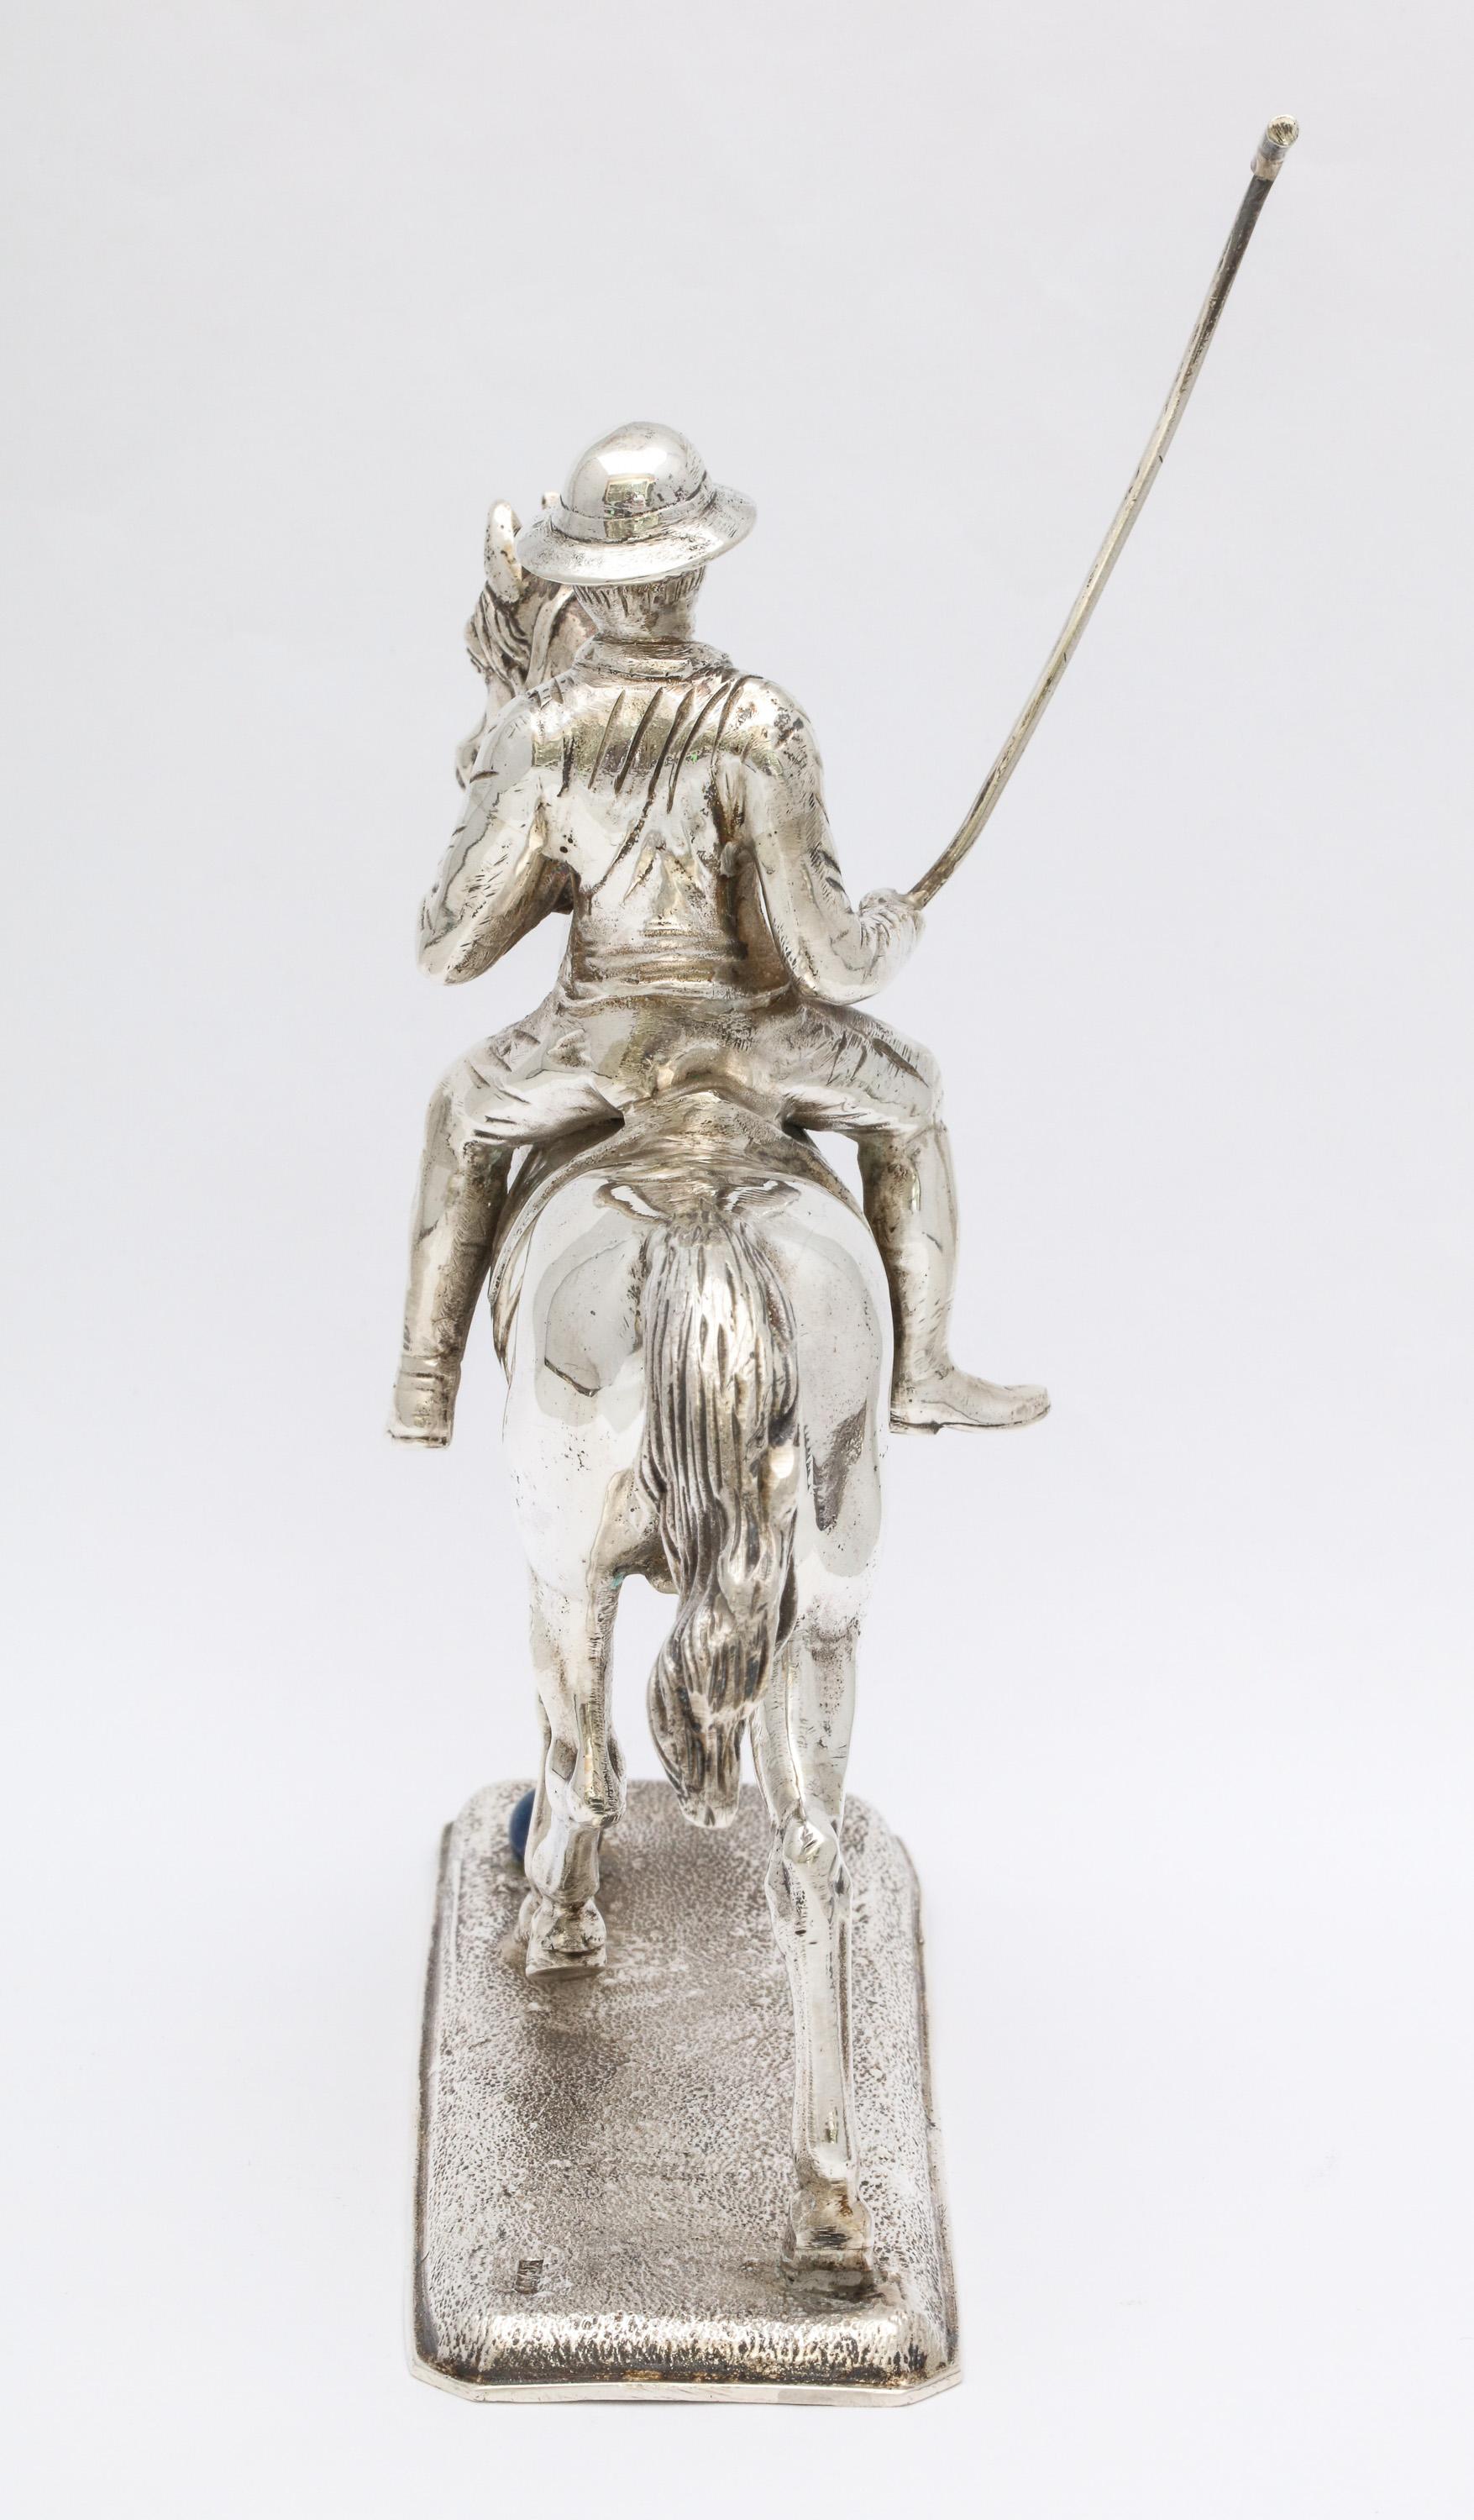 Unusual Mid-Century Modern Sterling Silver Statuette of a Polo Player on a Horse 1